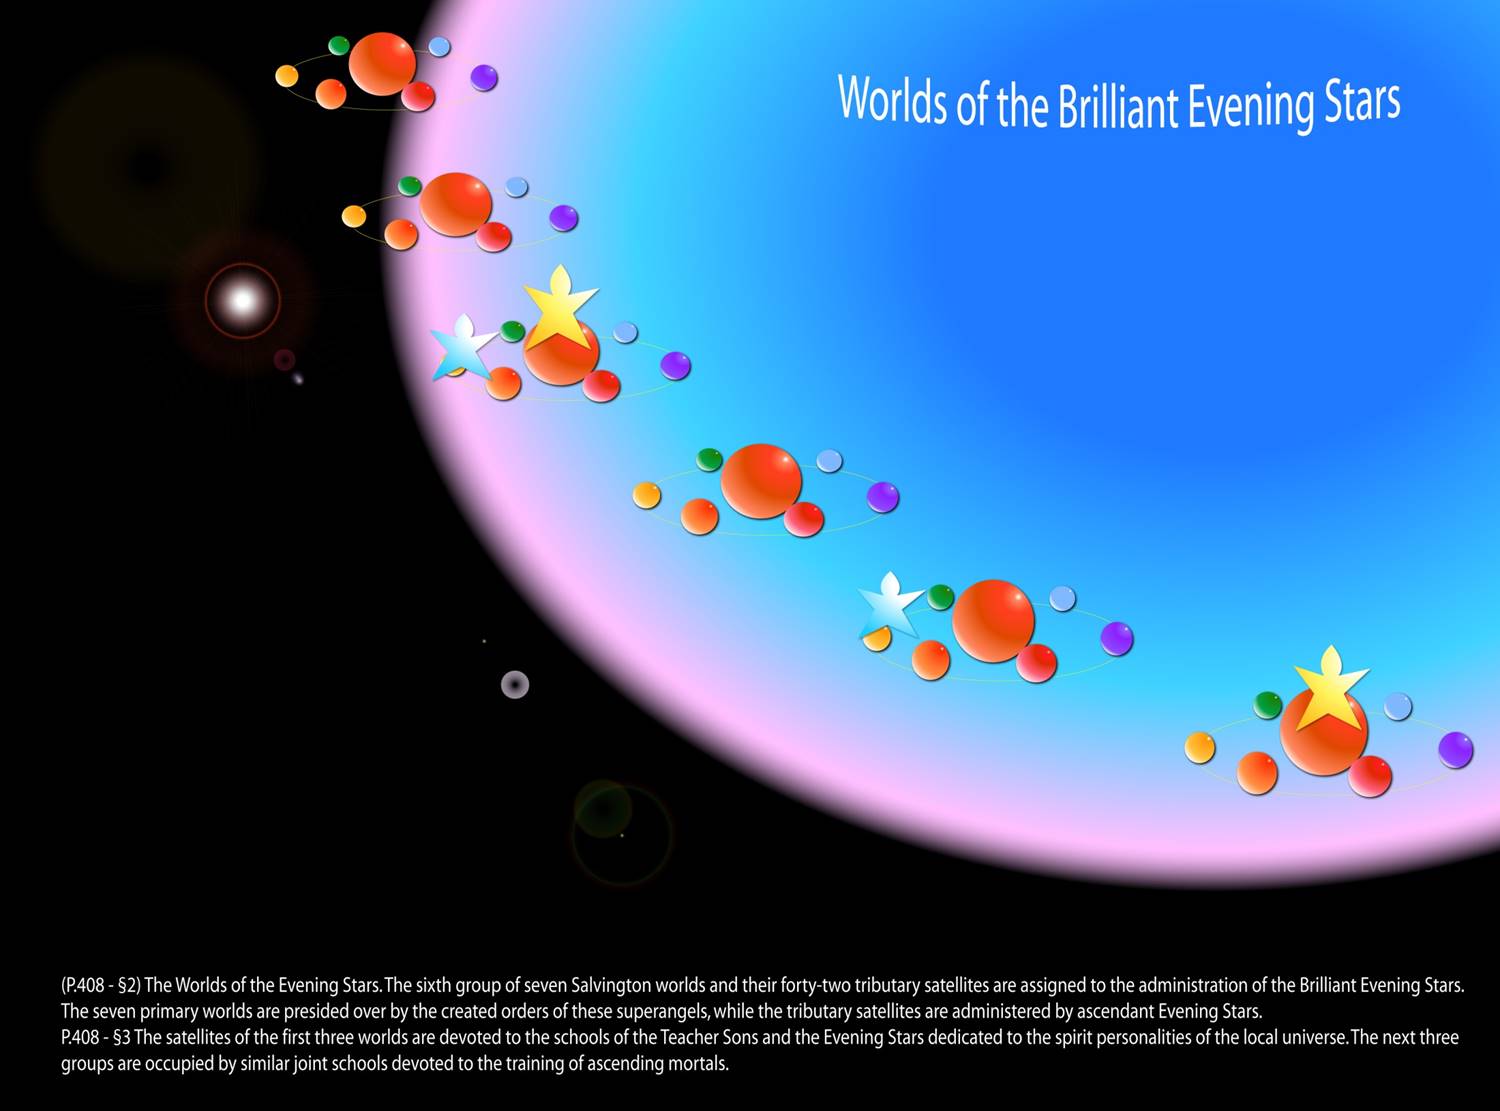 Worlds of the Brilliant Evening Stars